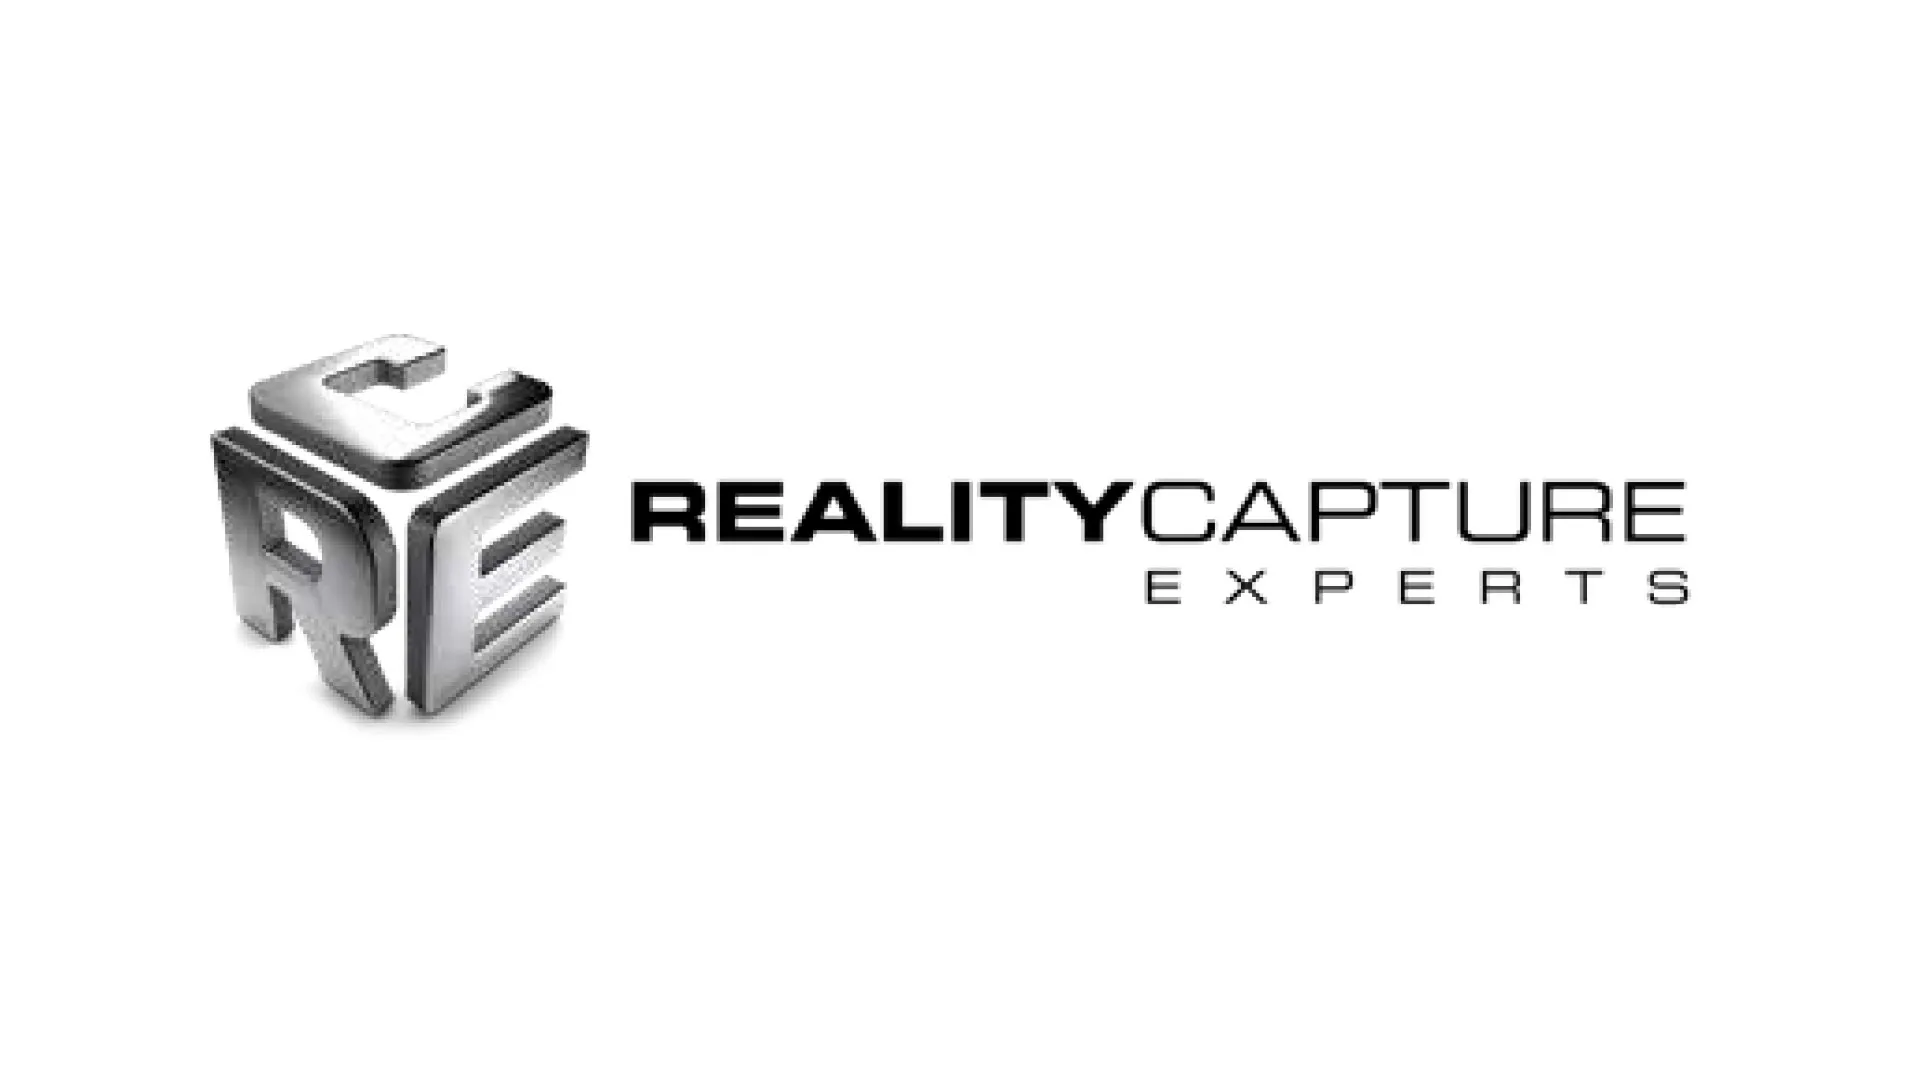 REALITY CAPTURE EXPERTS